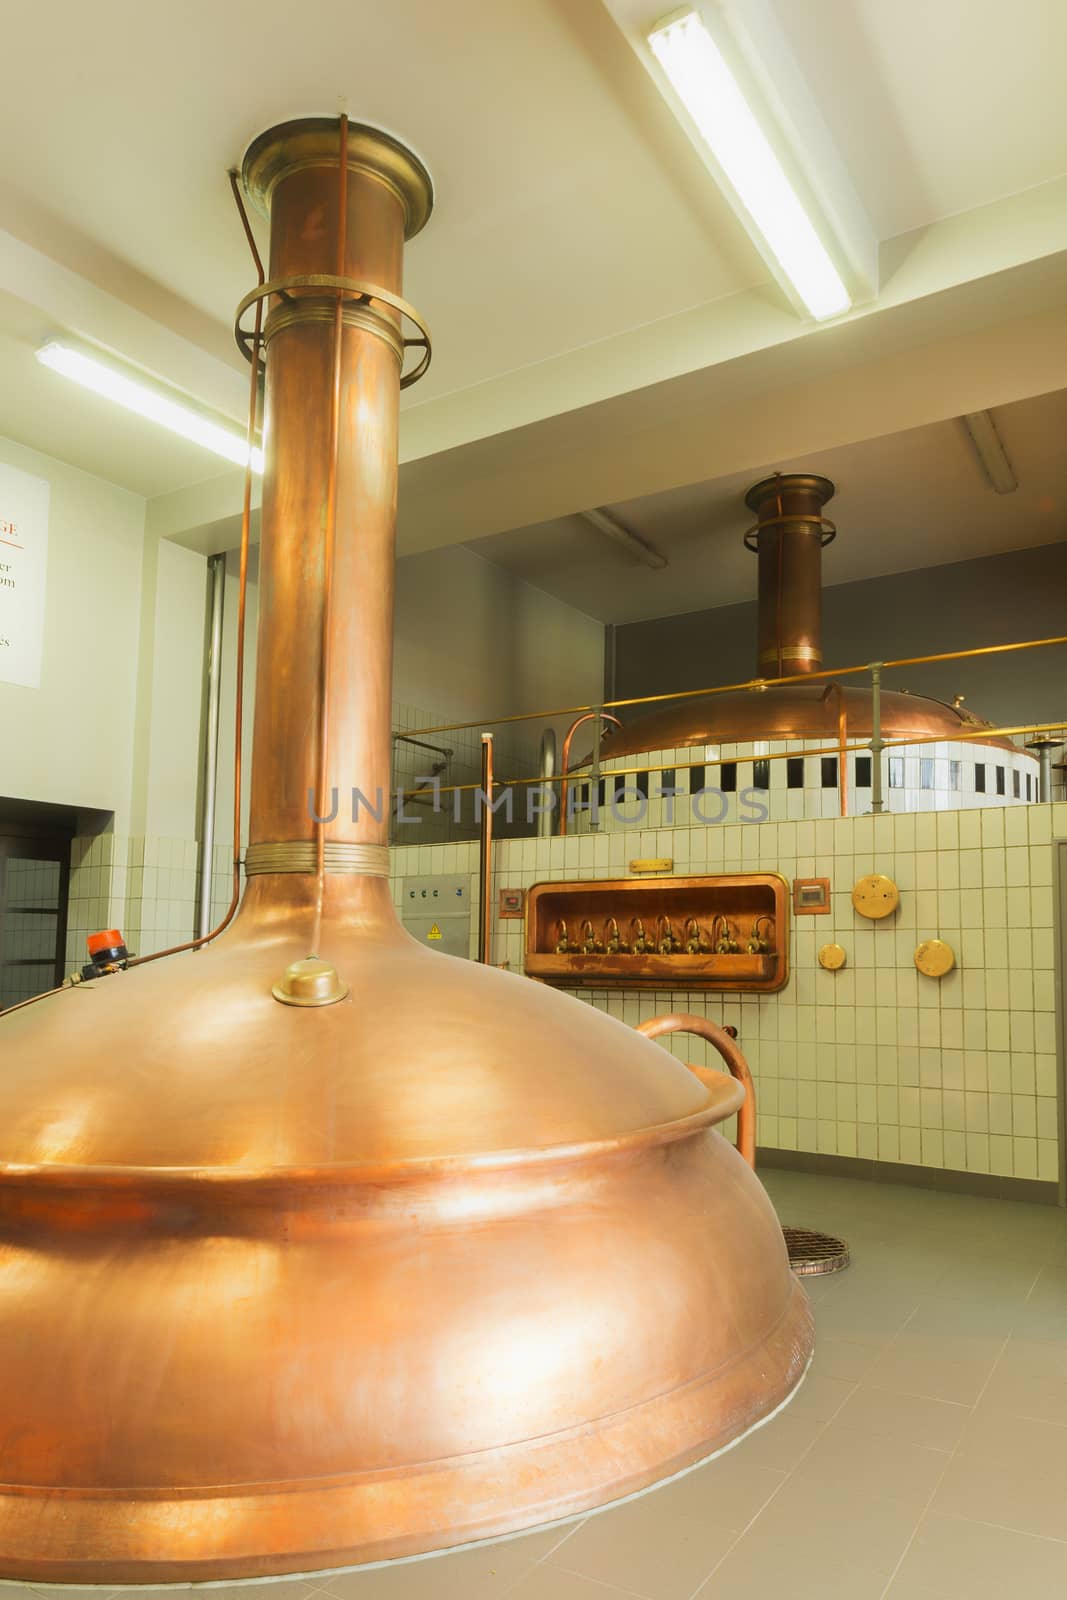 Boiling kettle and mash tun in the background. Brewery De Brabandere in Bavikhove, Belgium.